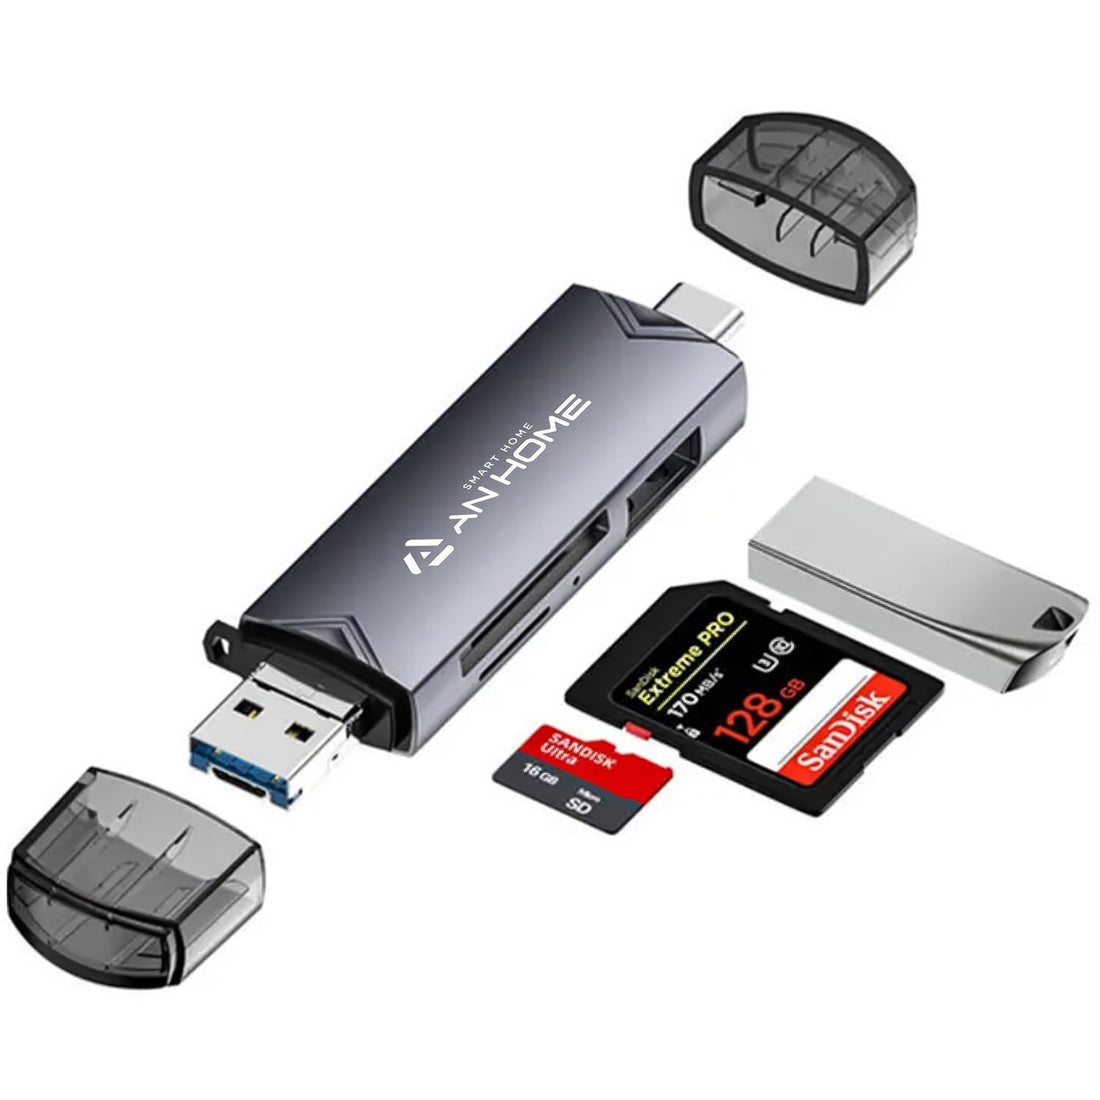 AnHome SD Card Reader, 6 in 1 OTG Connector USB 3.0/USB C/Micro USB Supports SD/Micro SD/SDXC/SDHC/MMC/RS-MMC/UHS-I, Compatible with MacBook/iPad Pro, Android Phone, PC, Laptop etc